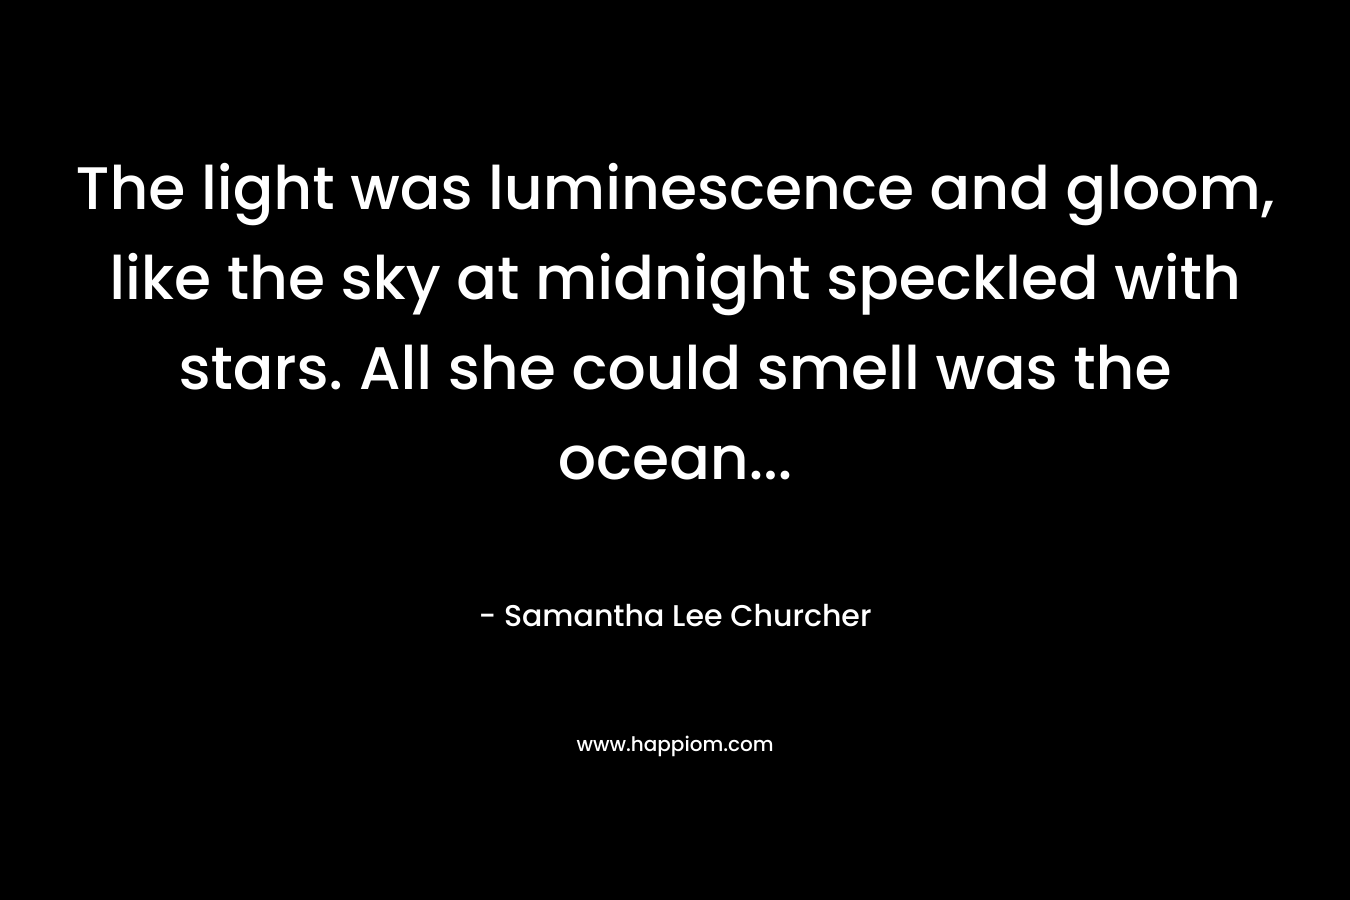 The light was luminescence and gloom, like the sky at midnight speckled with stars. All she could smell was the ocean...